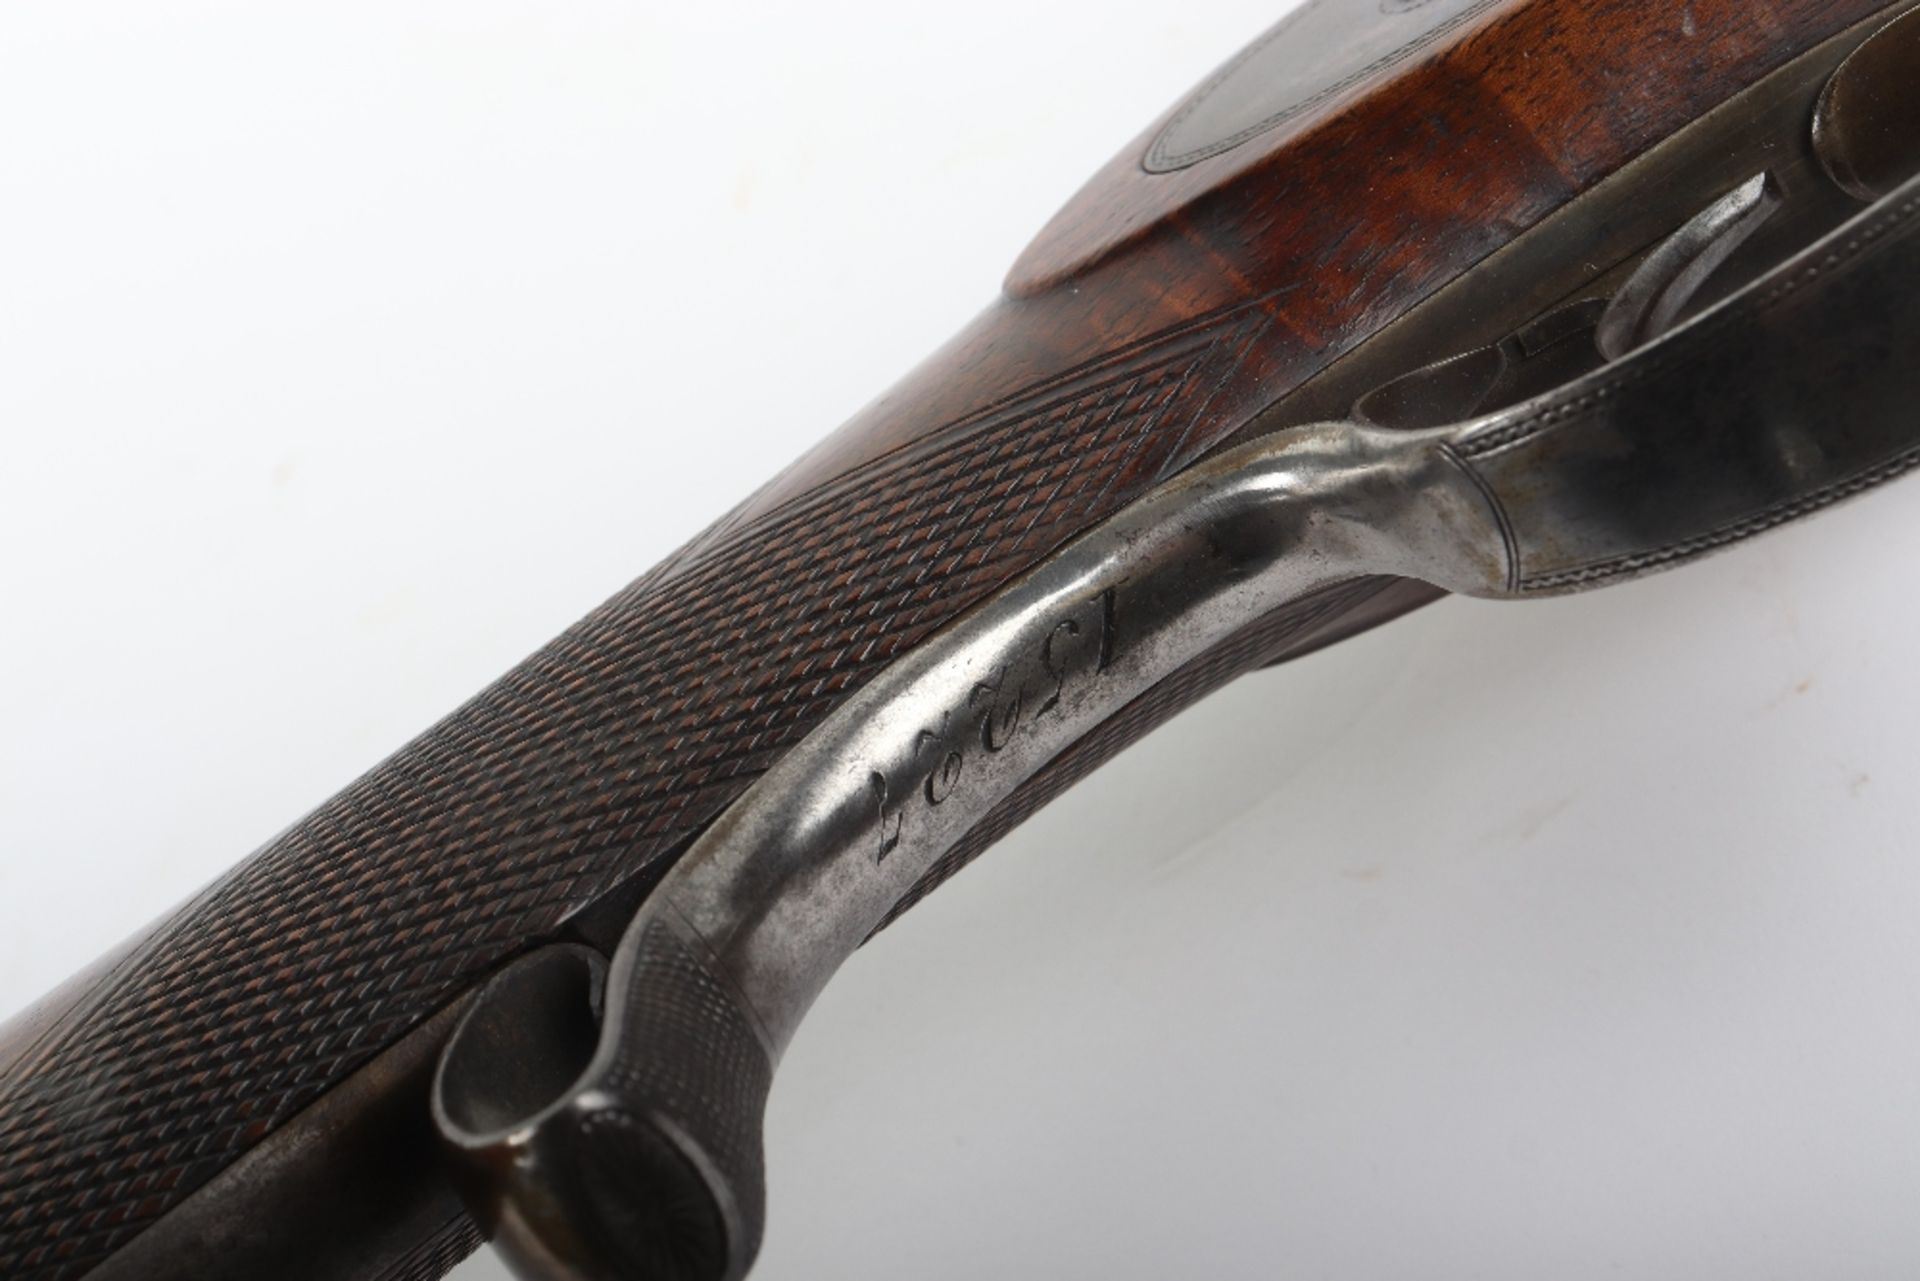 25-Bore Snider Action Breech Loading Sporting Rifle by Reilly No. 15227 - Image 6 of 14